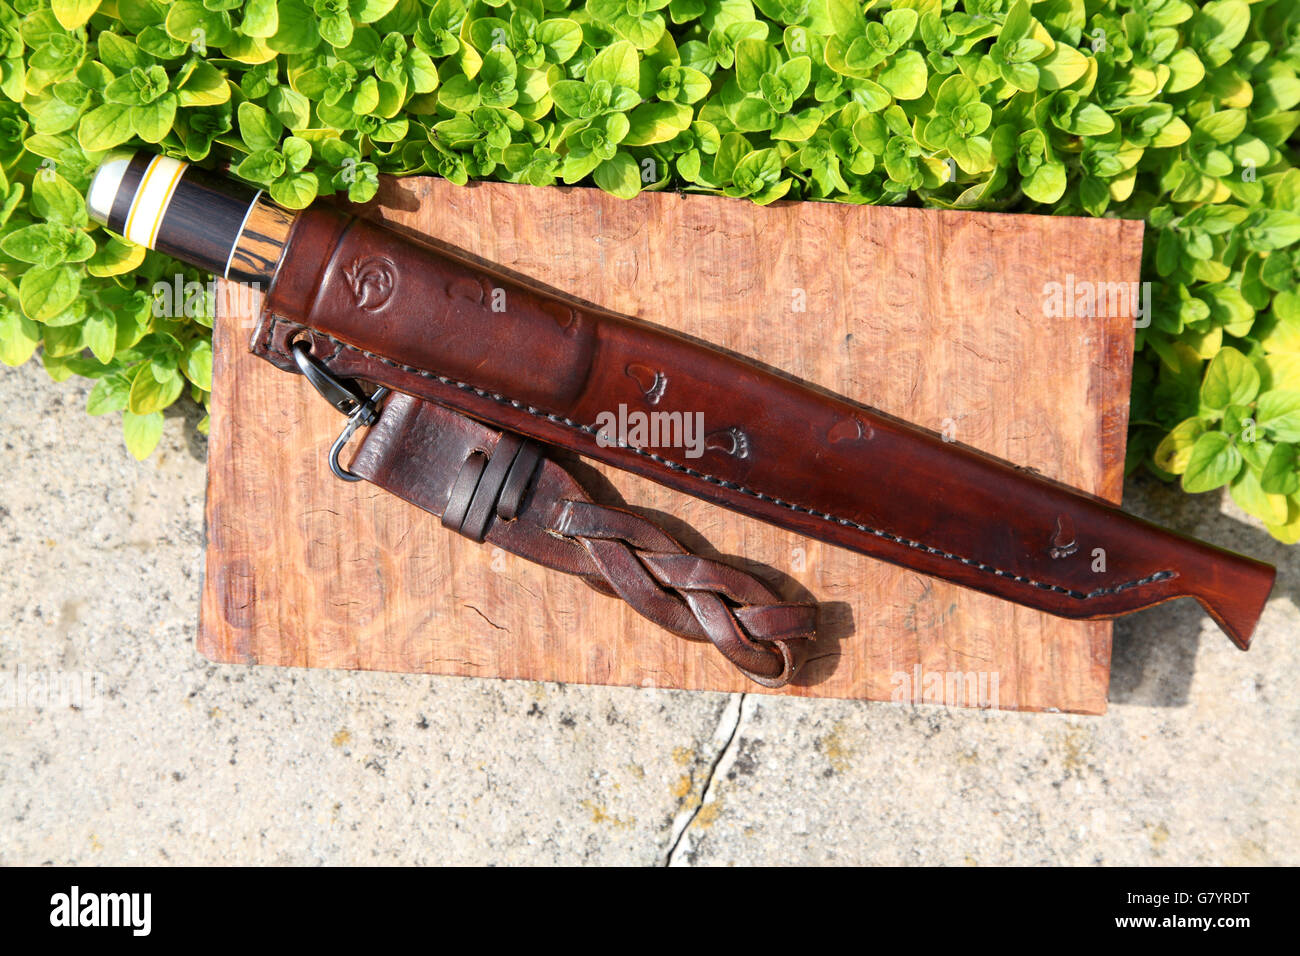 A decorative filleting knife enclosed in a brown leather scabbard laying on a wall with a belt 'dangler' attached Stock Photo